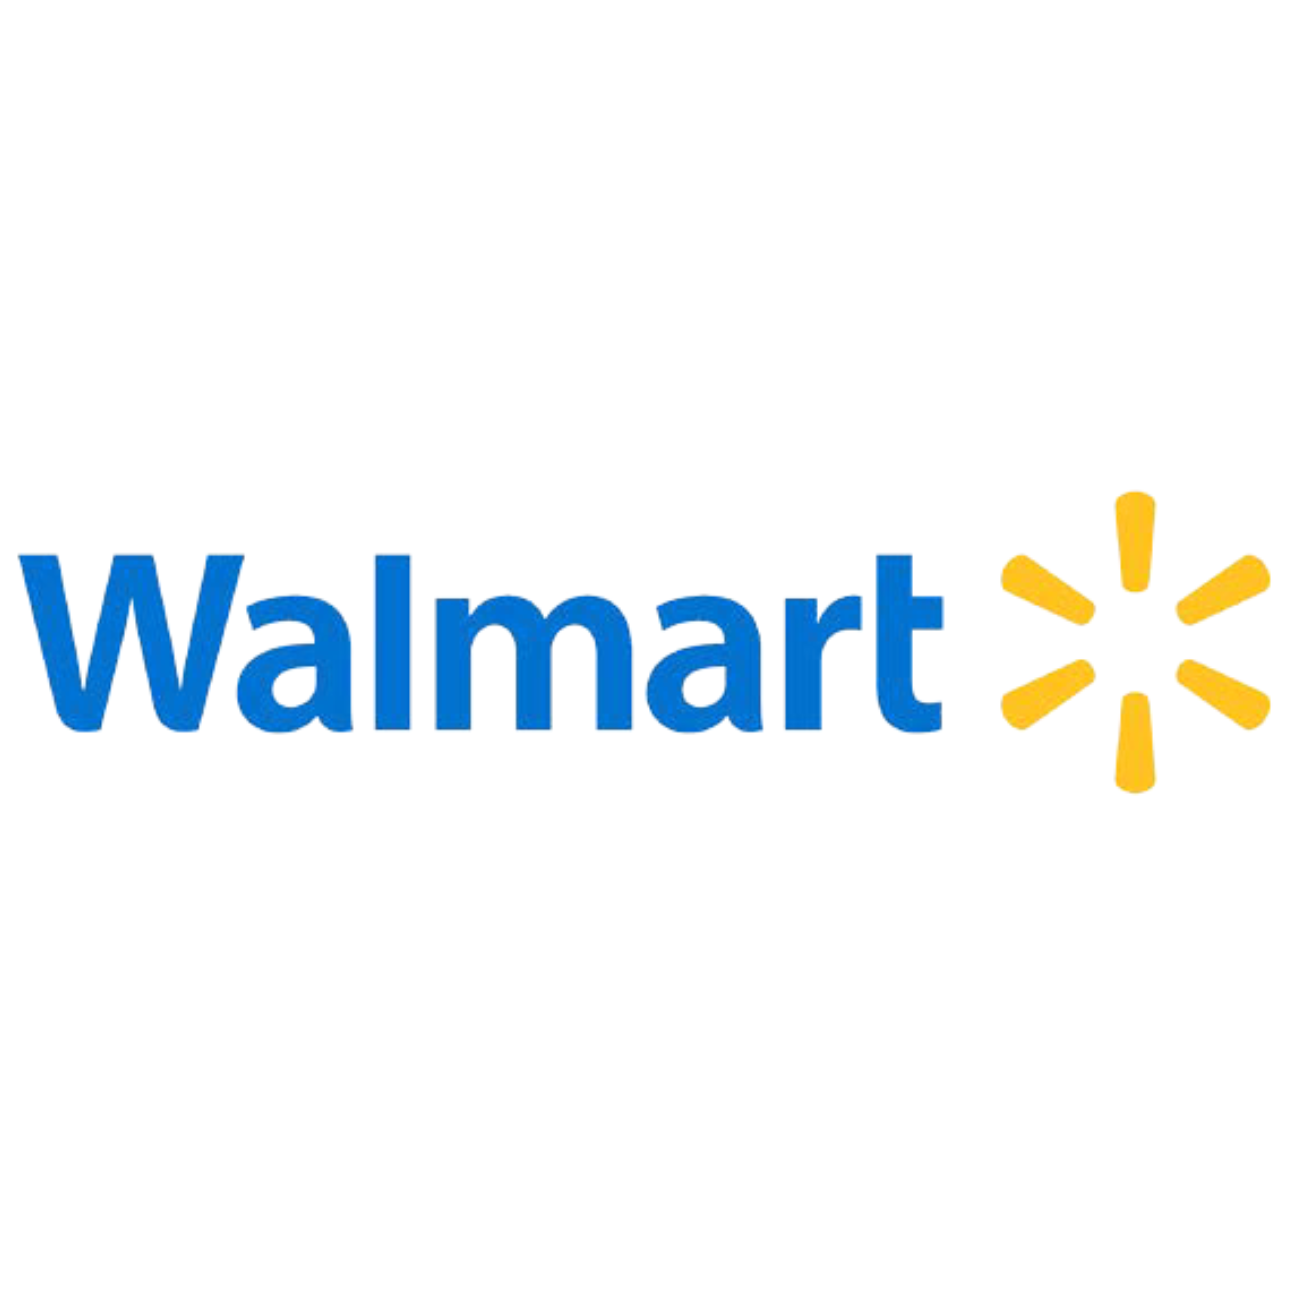 The Walmart word logo with blue text and a yellow starburst.